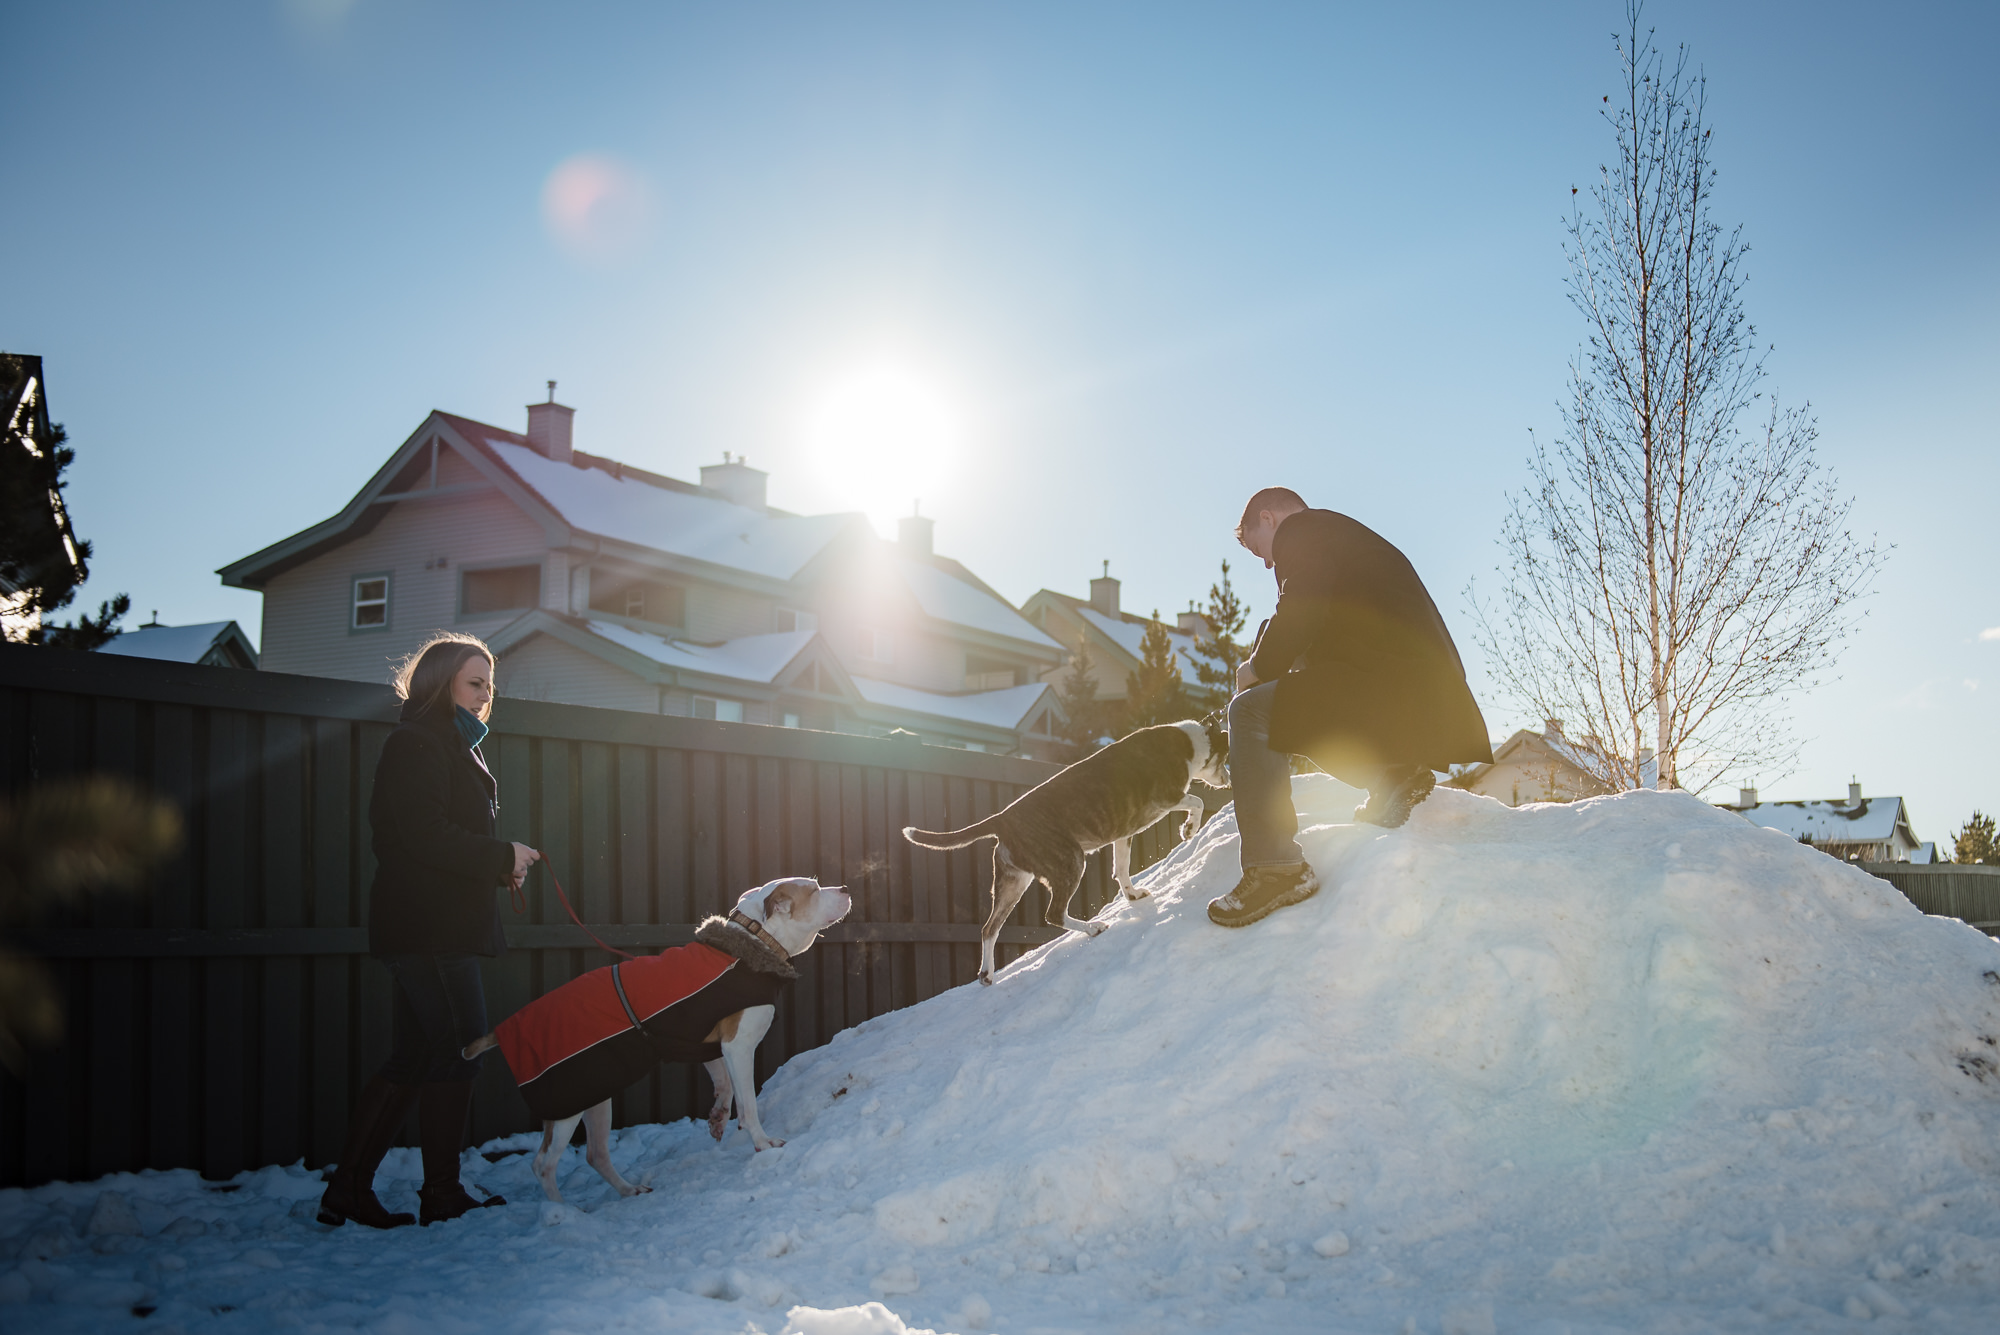 Dogs climb a snow pile in an Edmonton neighbourhood during a family photo session